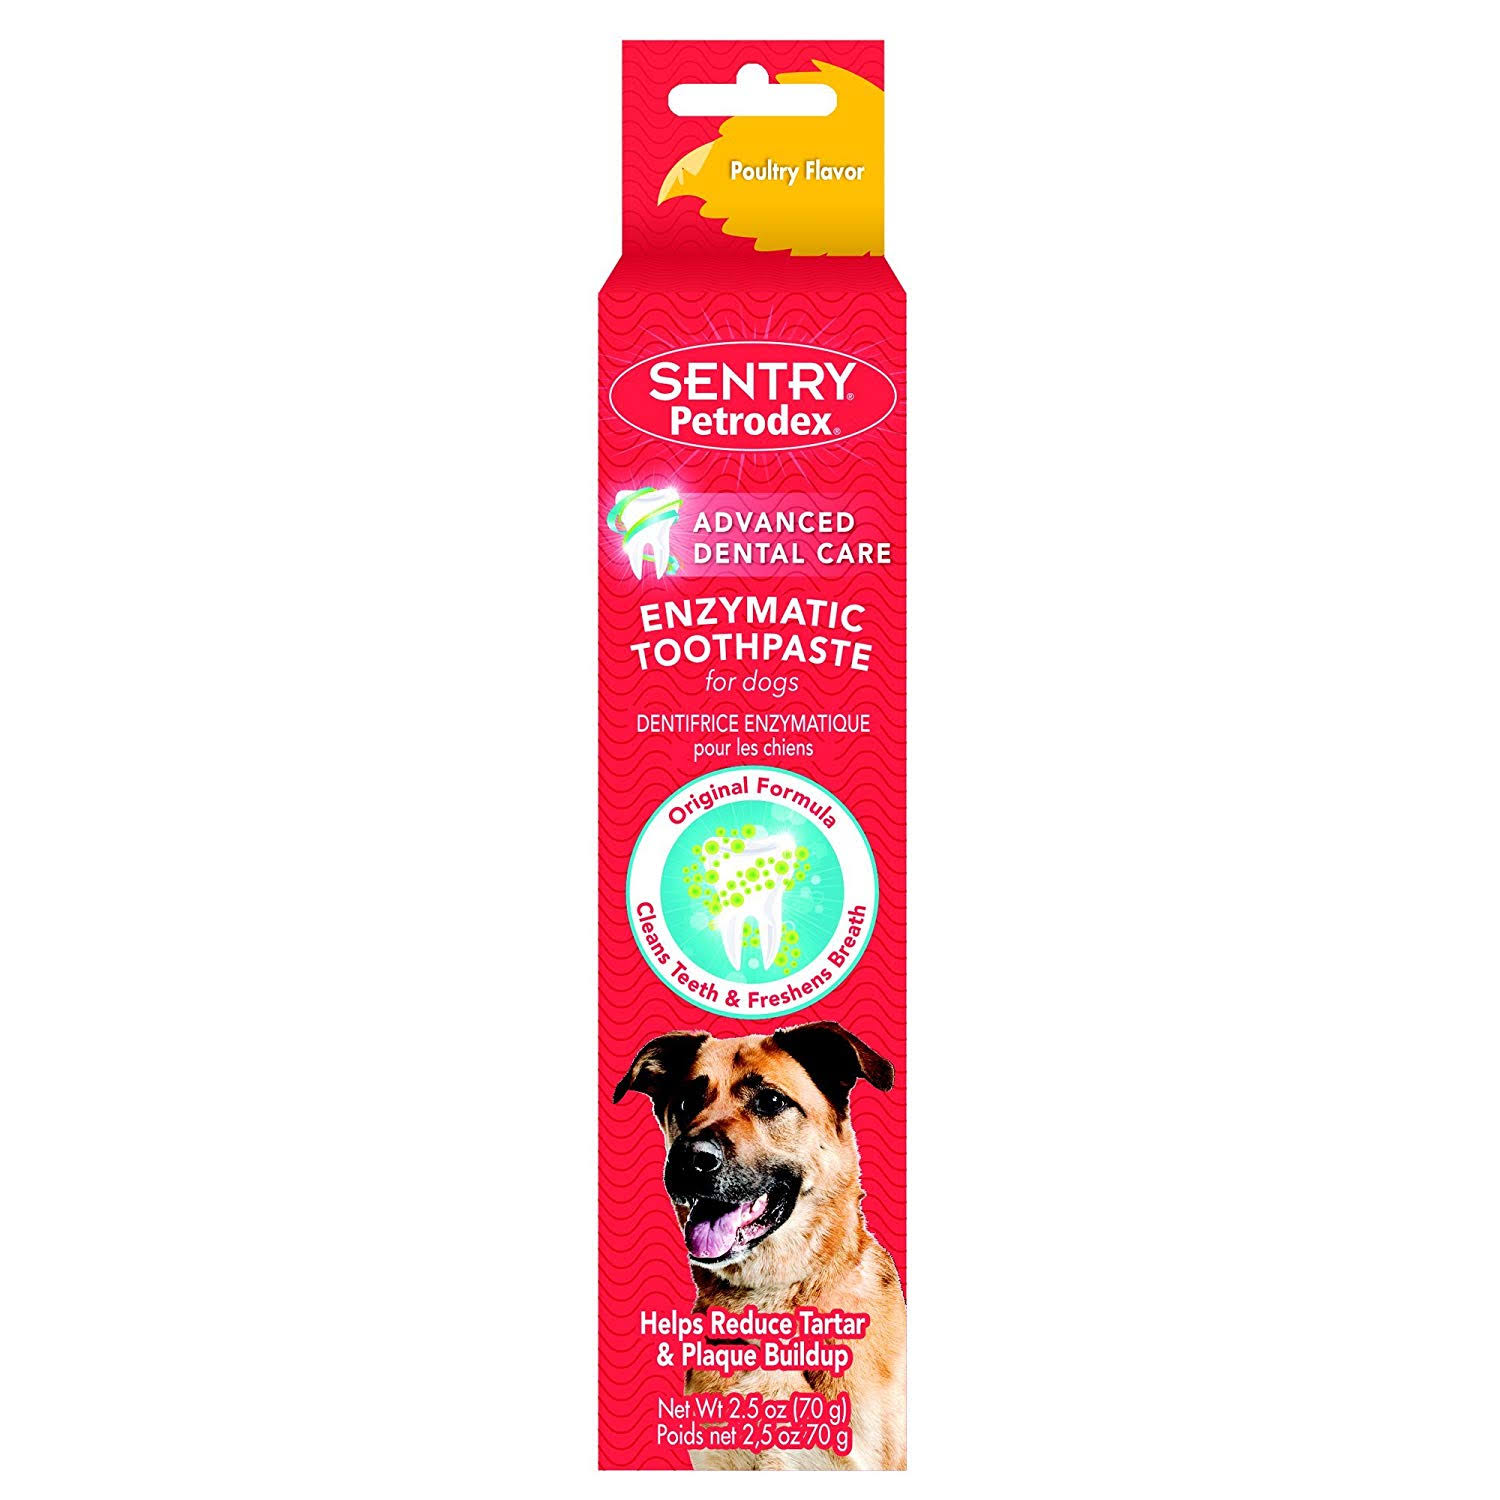 Petrodex Enzymatic Toothpaste for Dogs 2.5oz Poultry Flavor